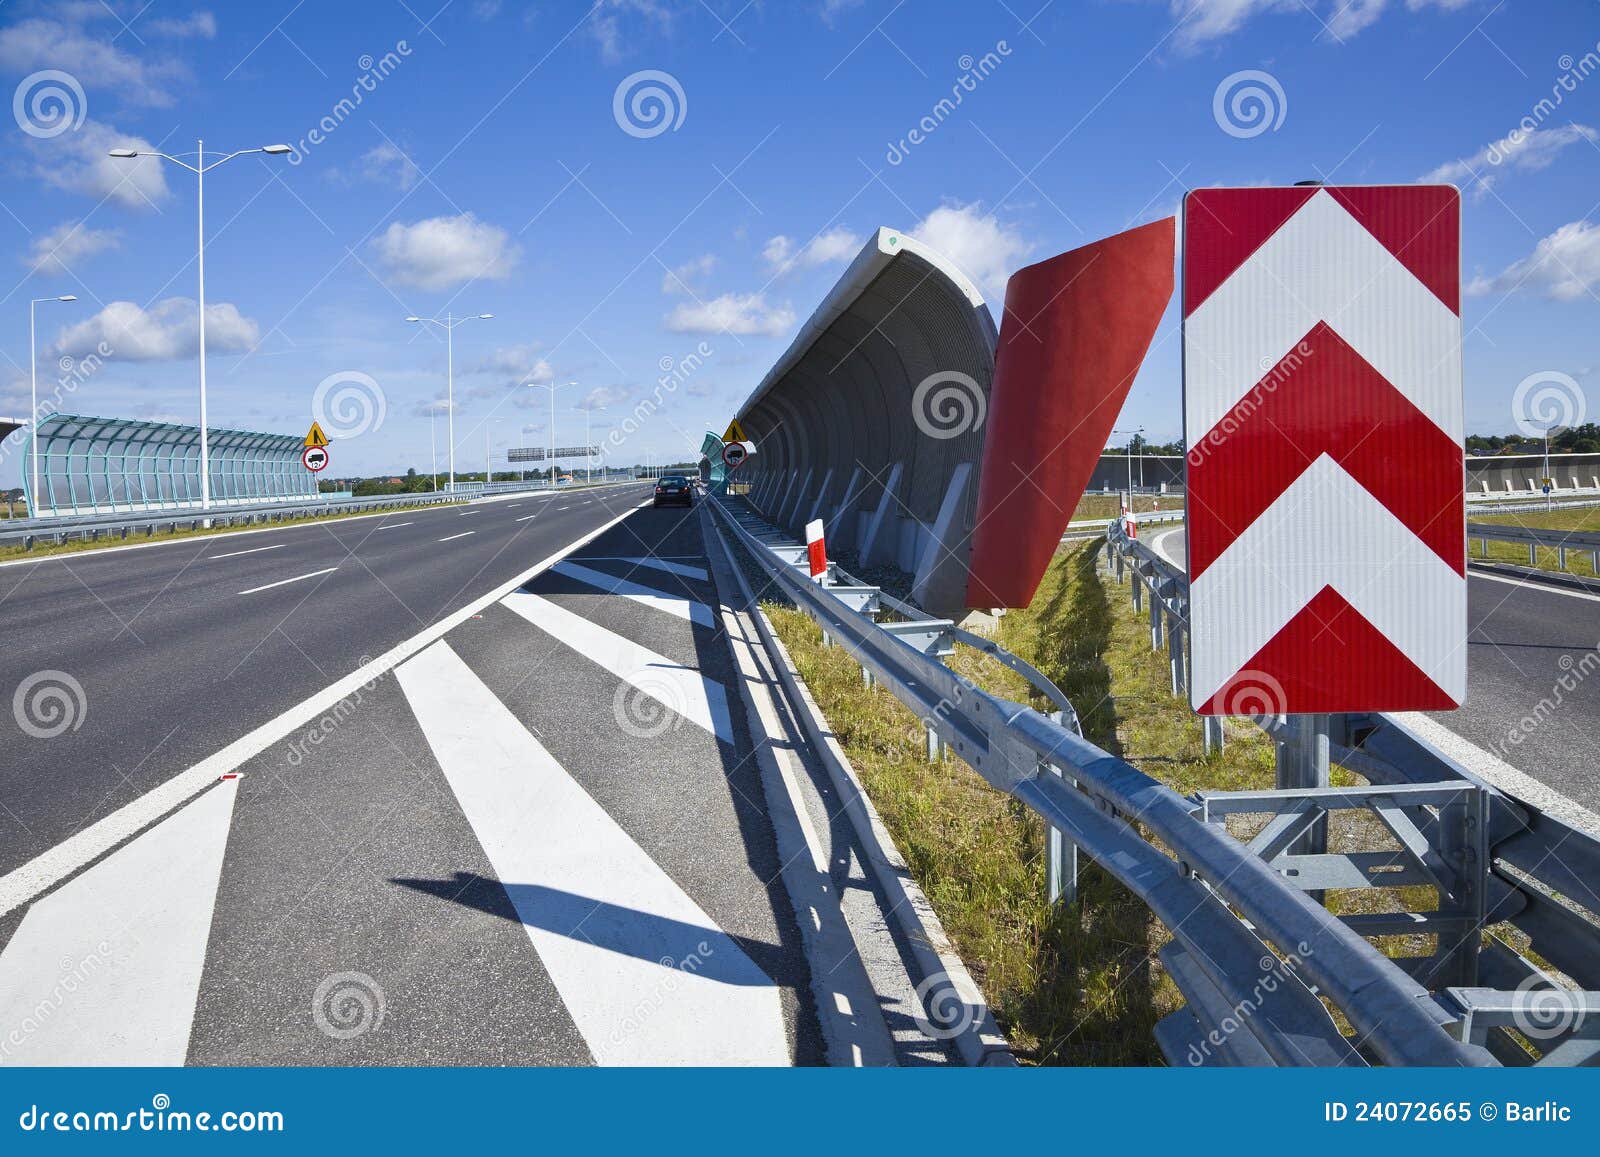 922 Highway Walls Photos - Free & Royalty-Free Stock Photos from Dreamstime